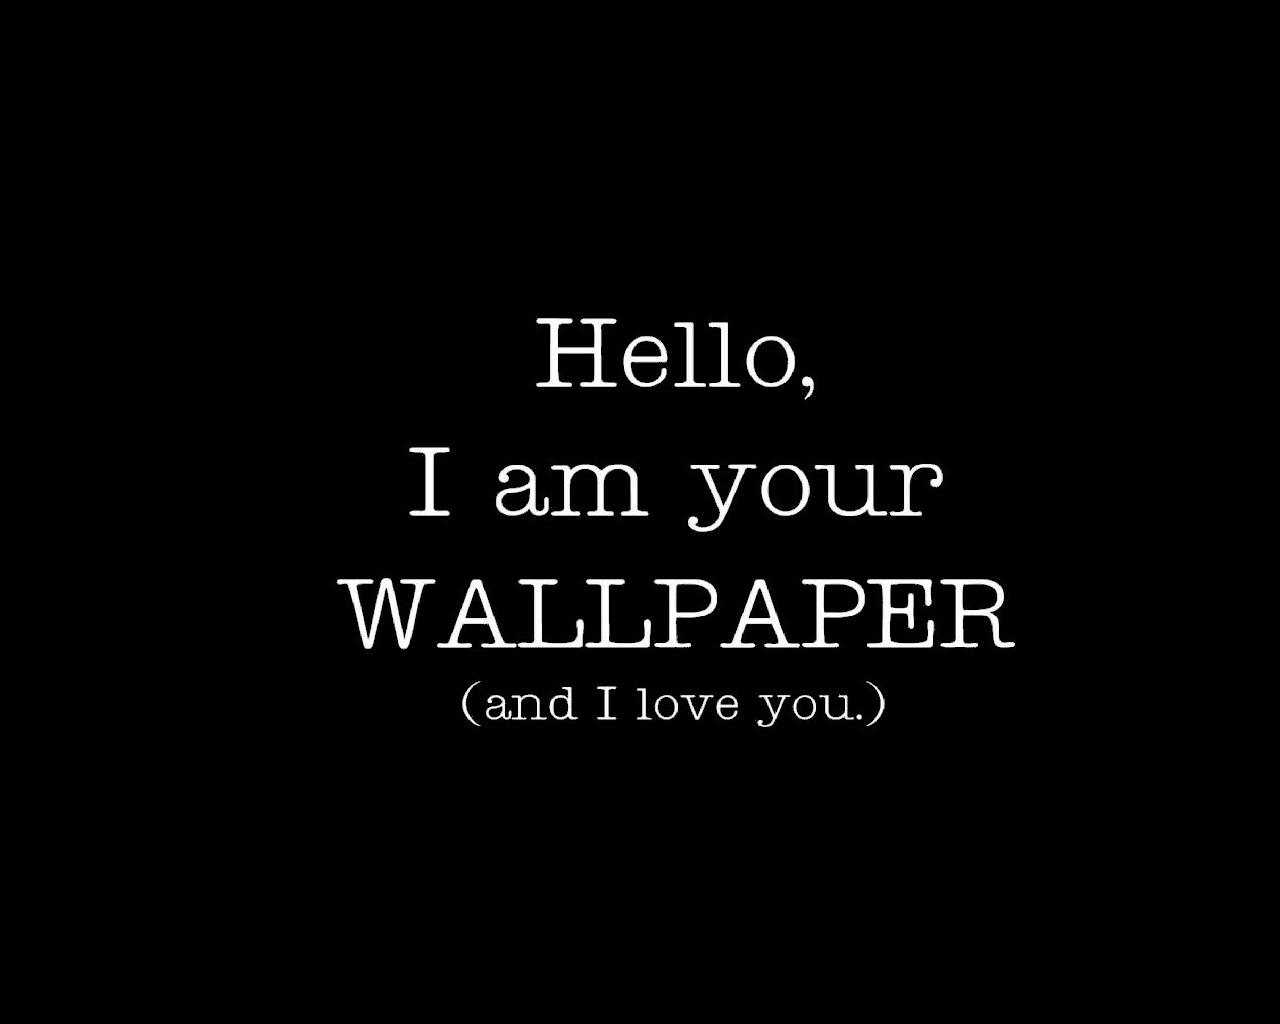 Funny Quotes Black Background Wallpaper HD #7421 Wallpaper | High ...